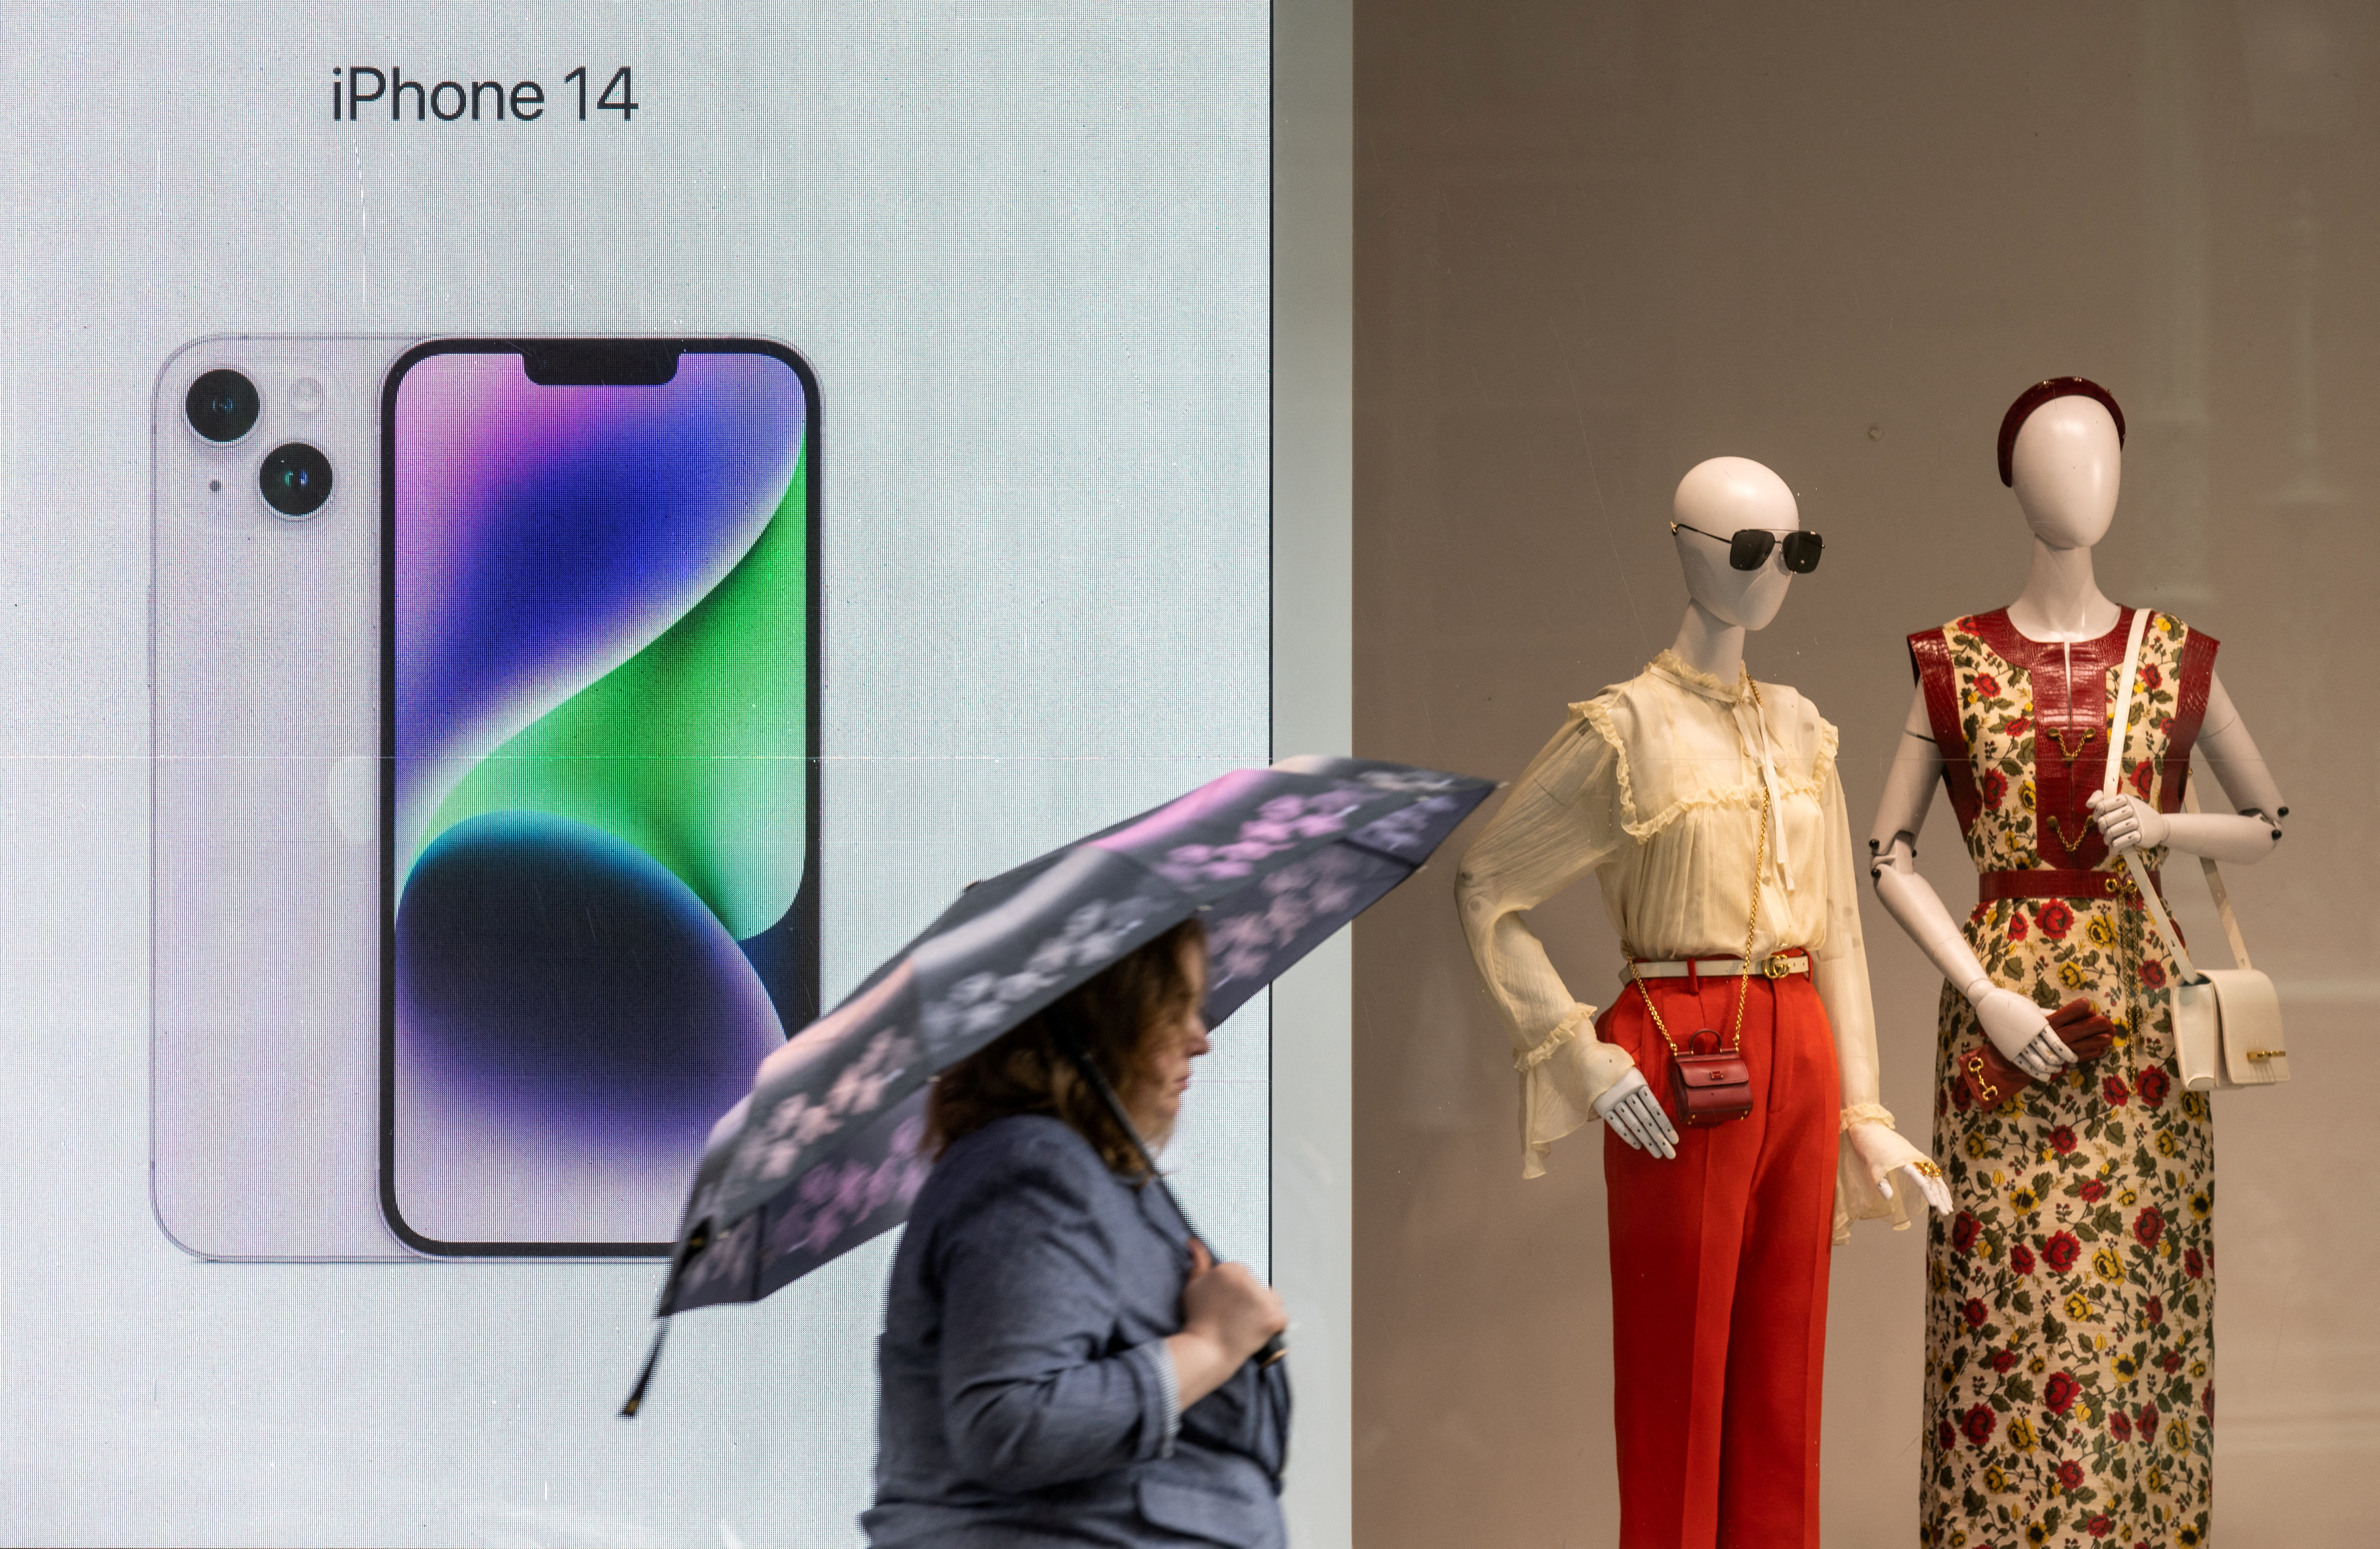 A woman with an umbrella walks past a display advertising Apple iPhone 14 during rainy weather in Moscow